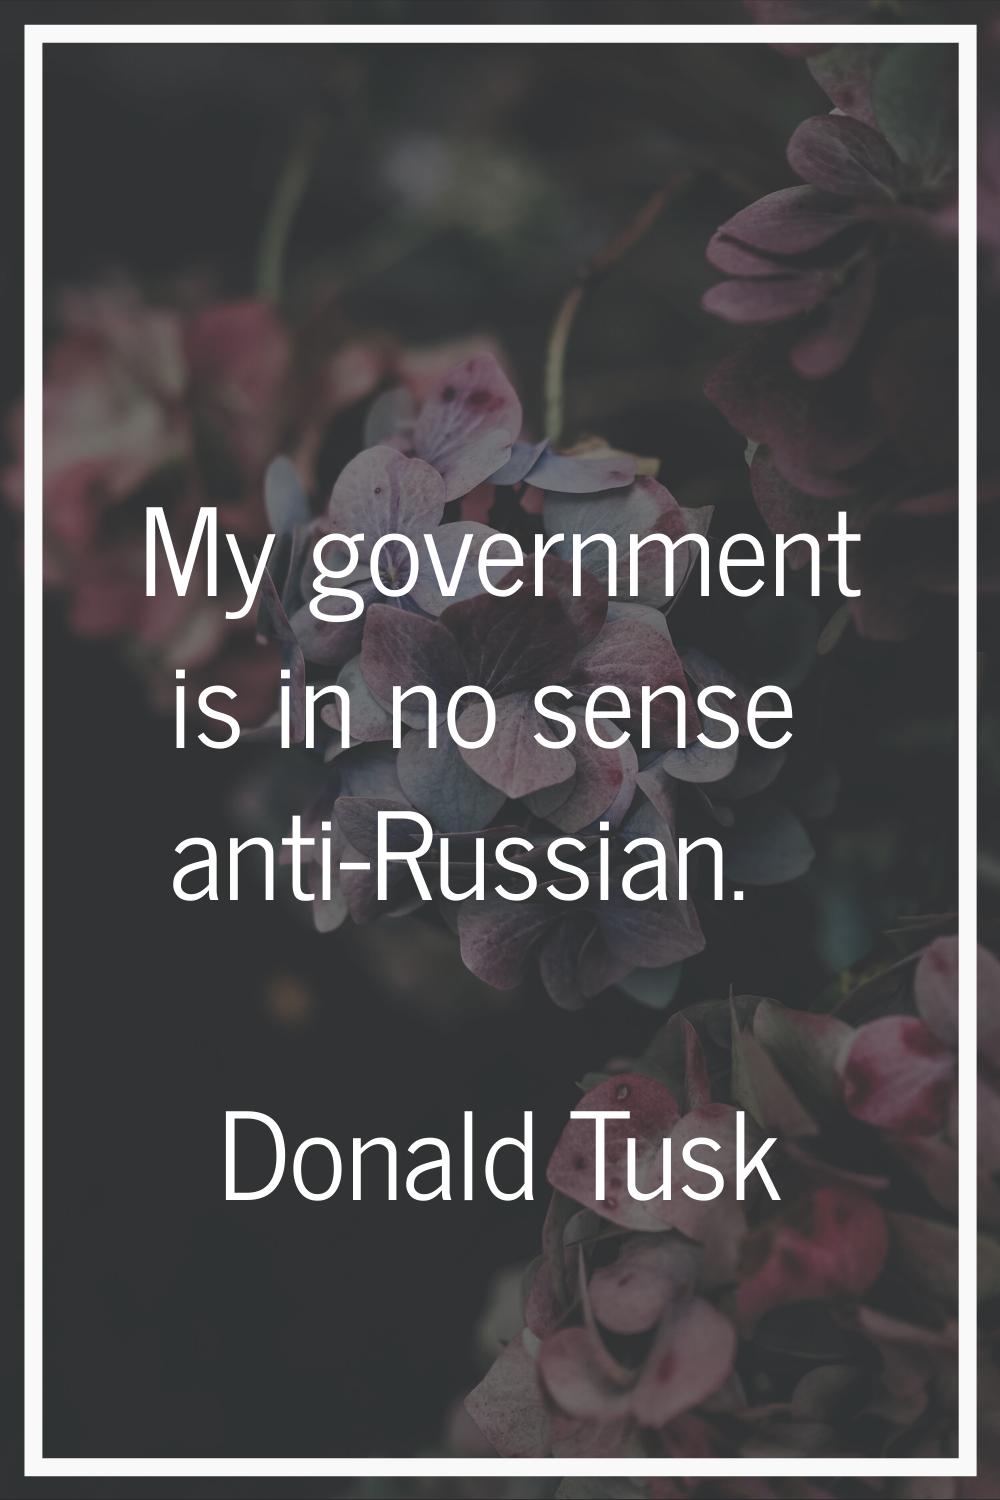 My government is in no sense anti-Russian.